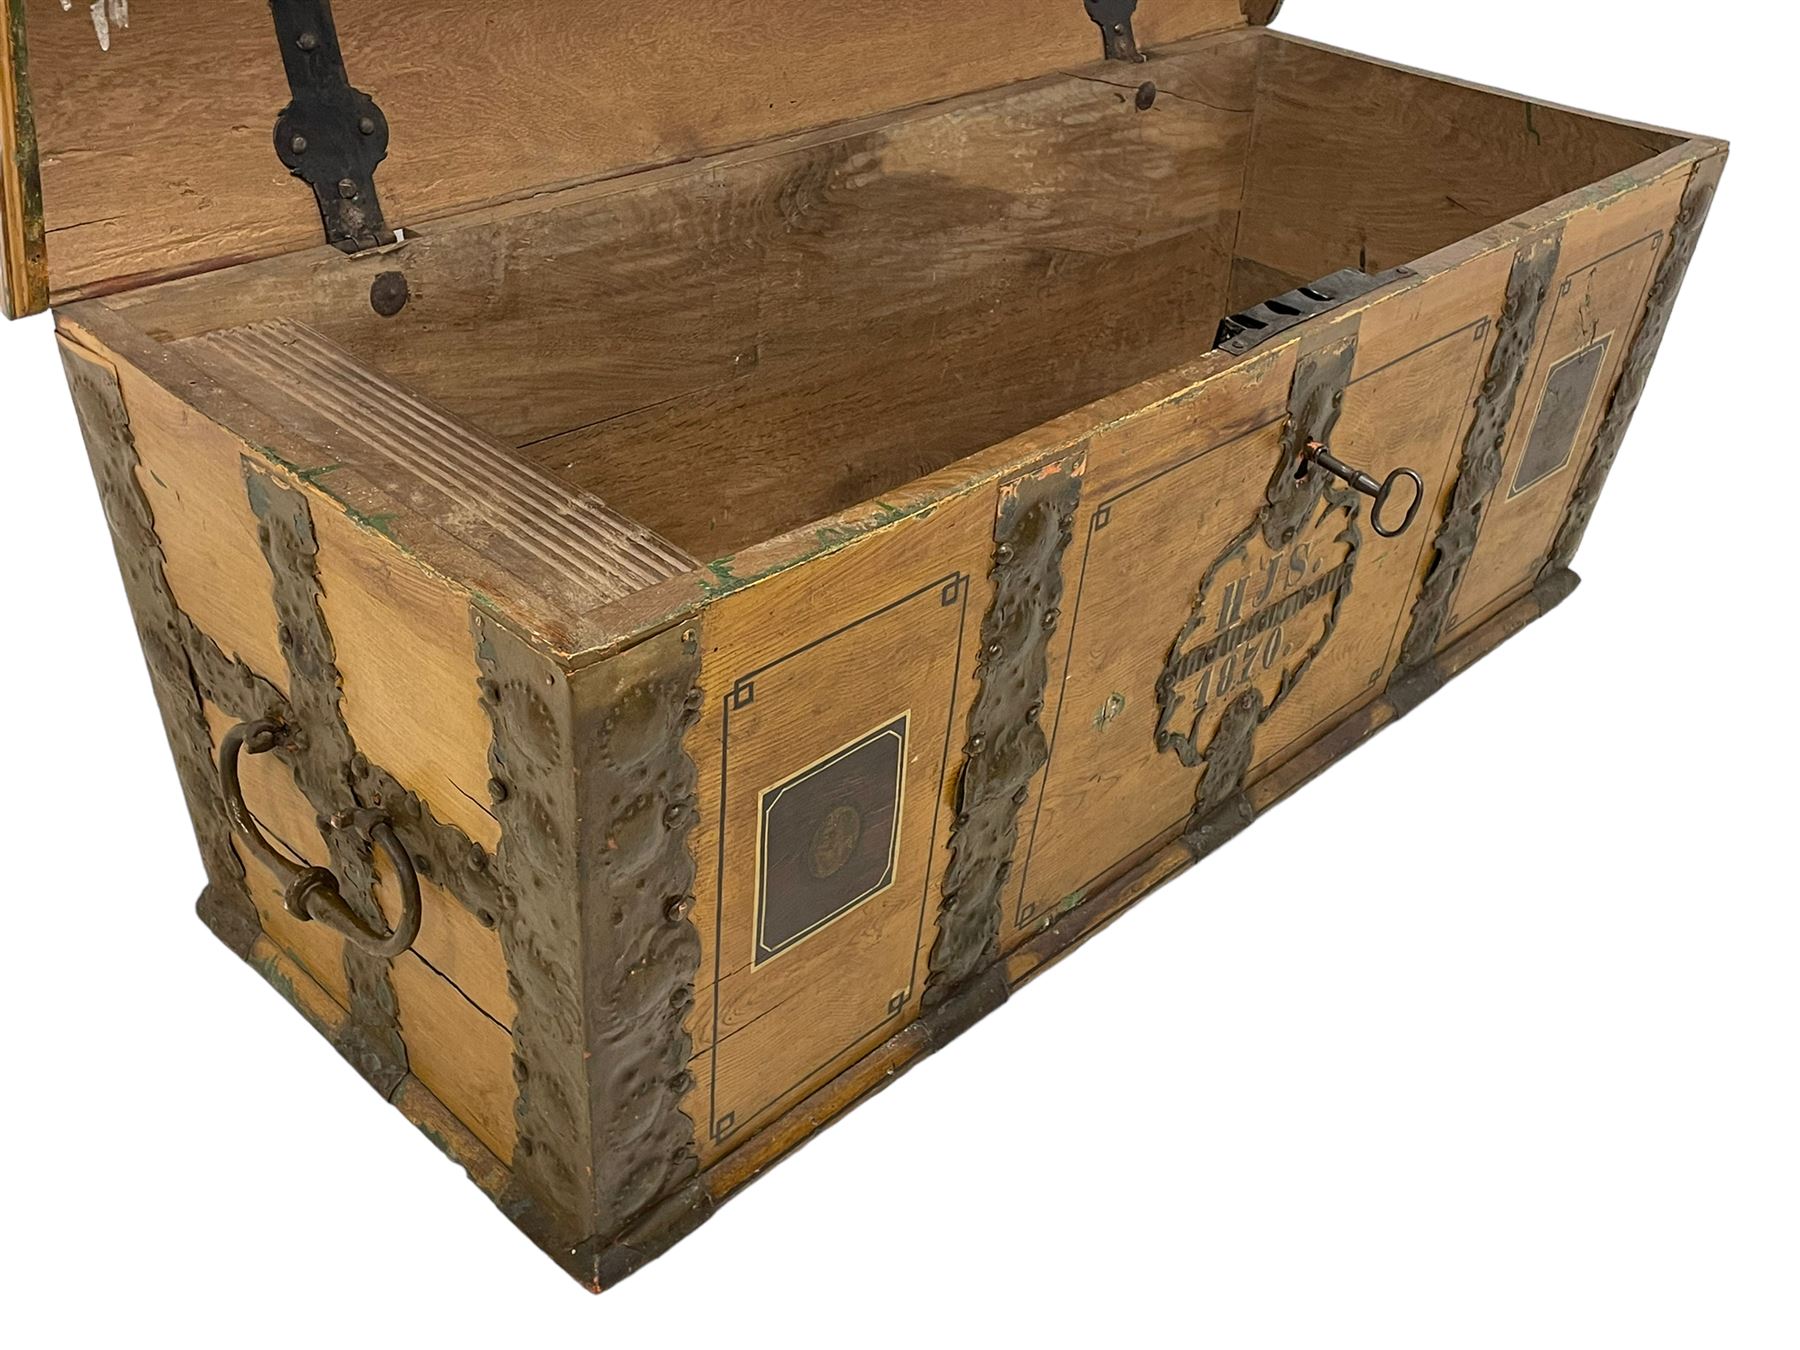 19th century Northern European painted oak sea chest - Image 21 of 29